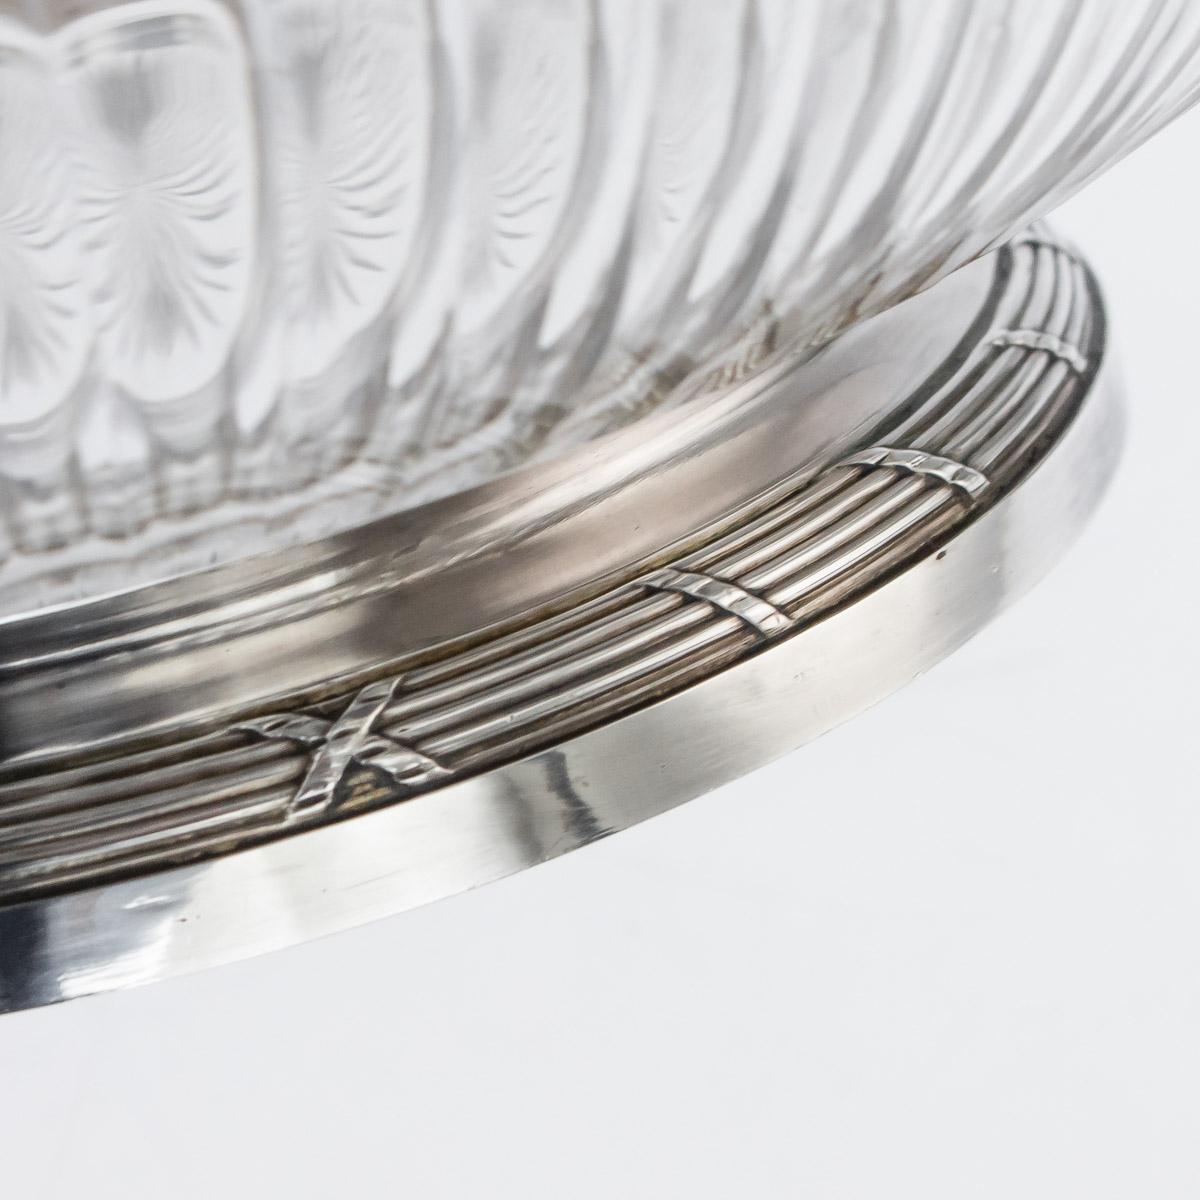 20th Century French Empire Solid Silver & Glass Bowl, Paris, c.1900 For Sale 4